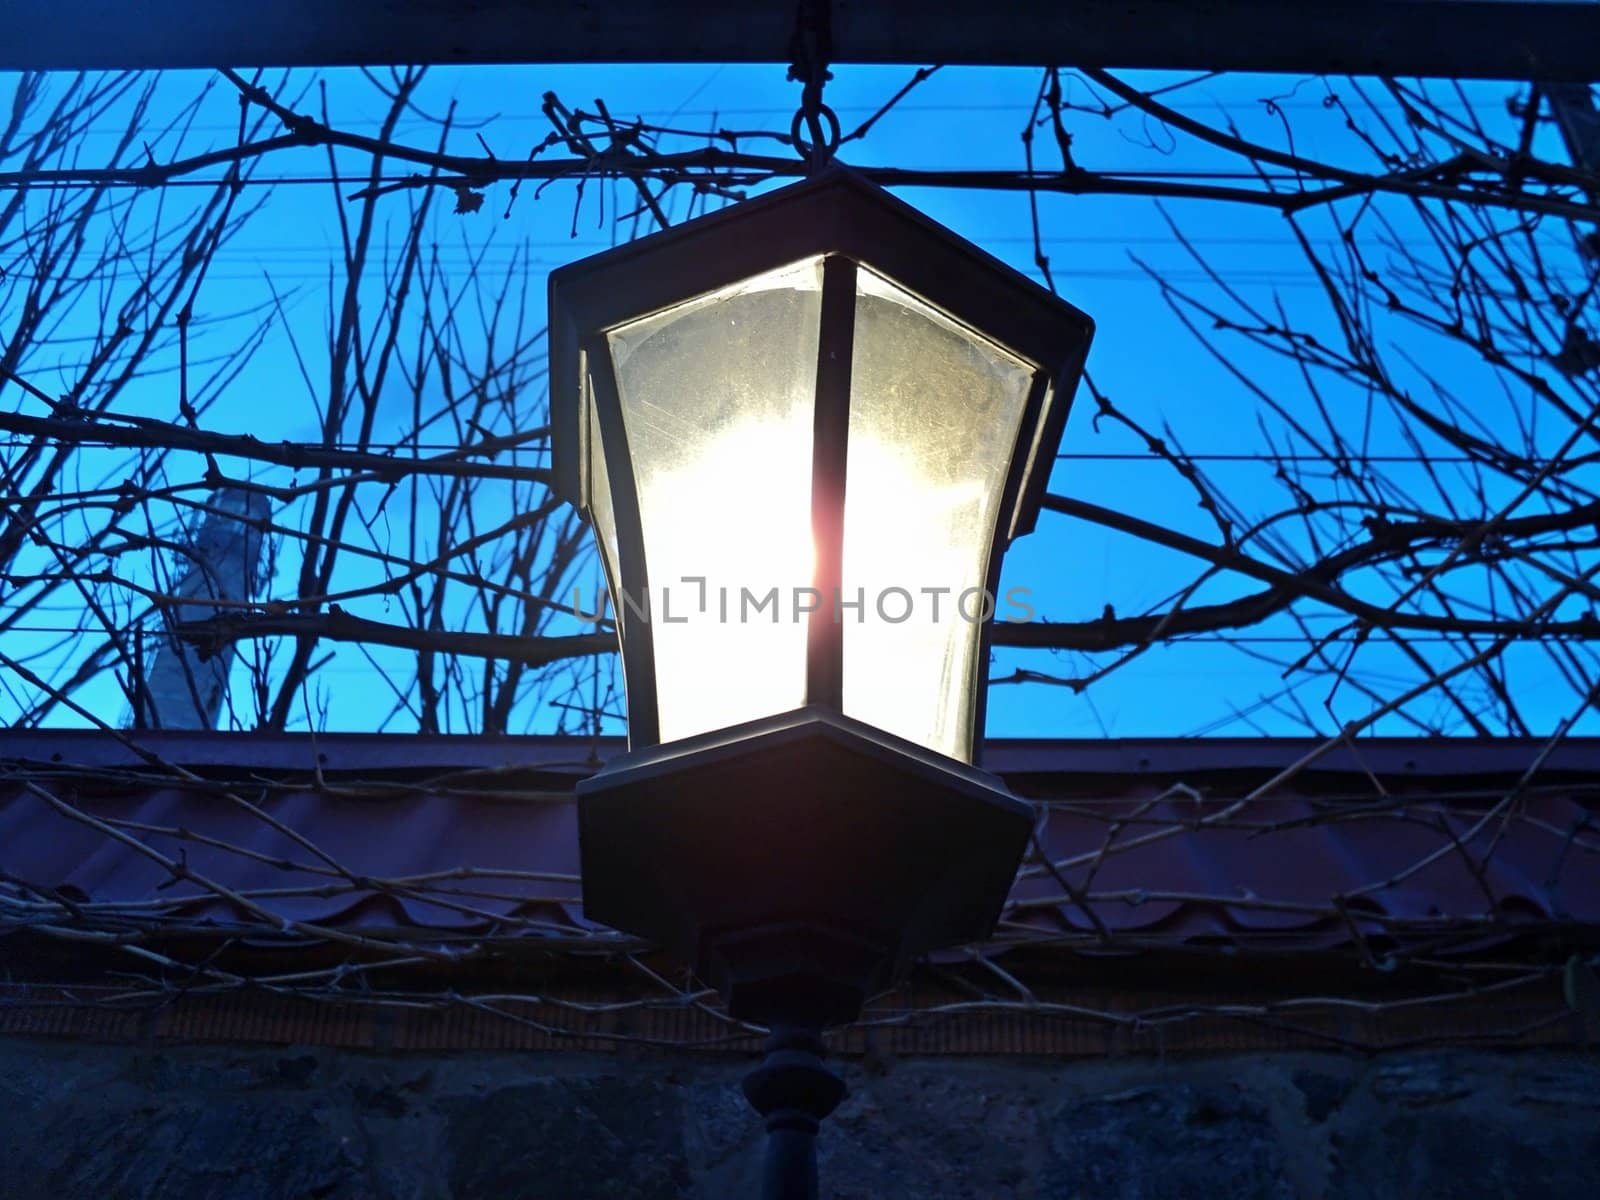 General view of a being shone electric lamp against the dark blue sky